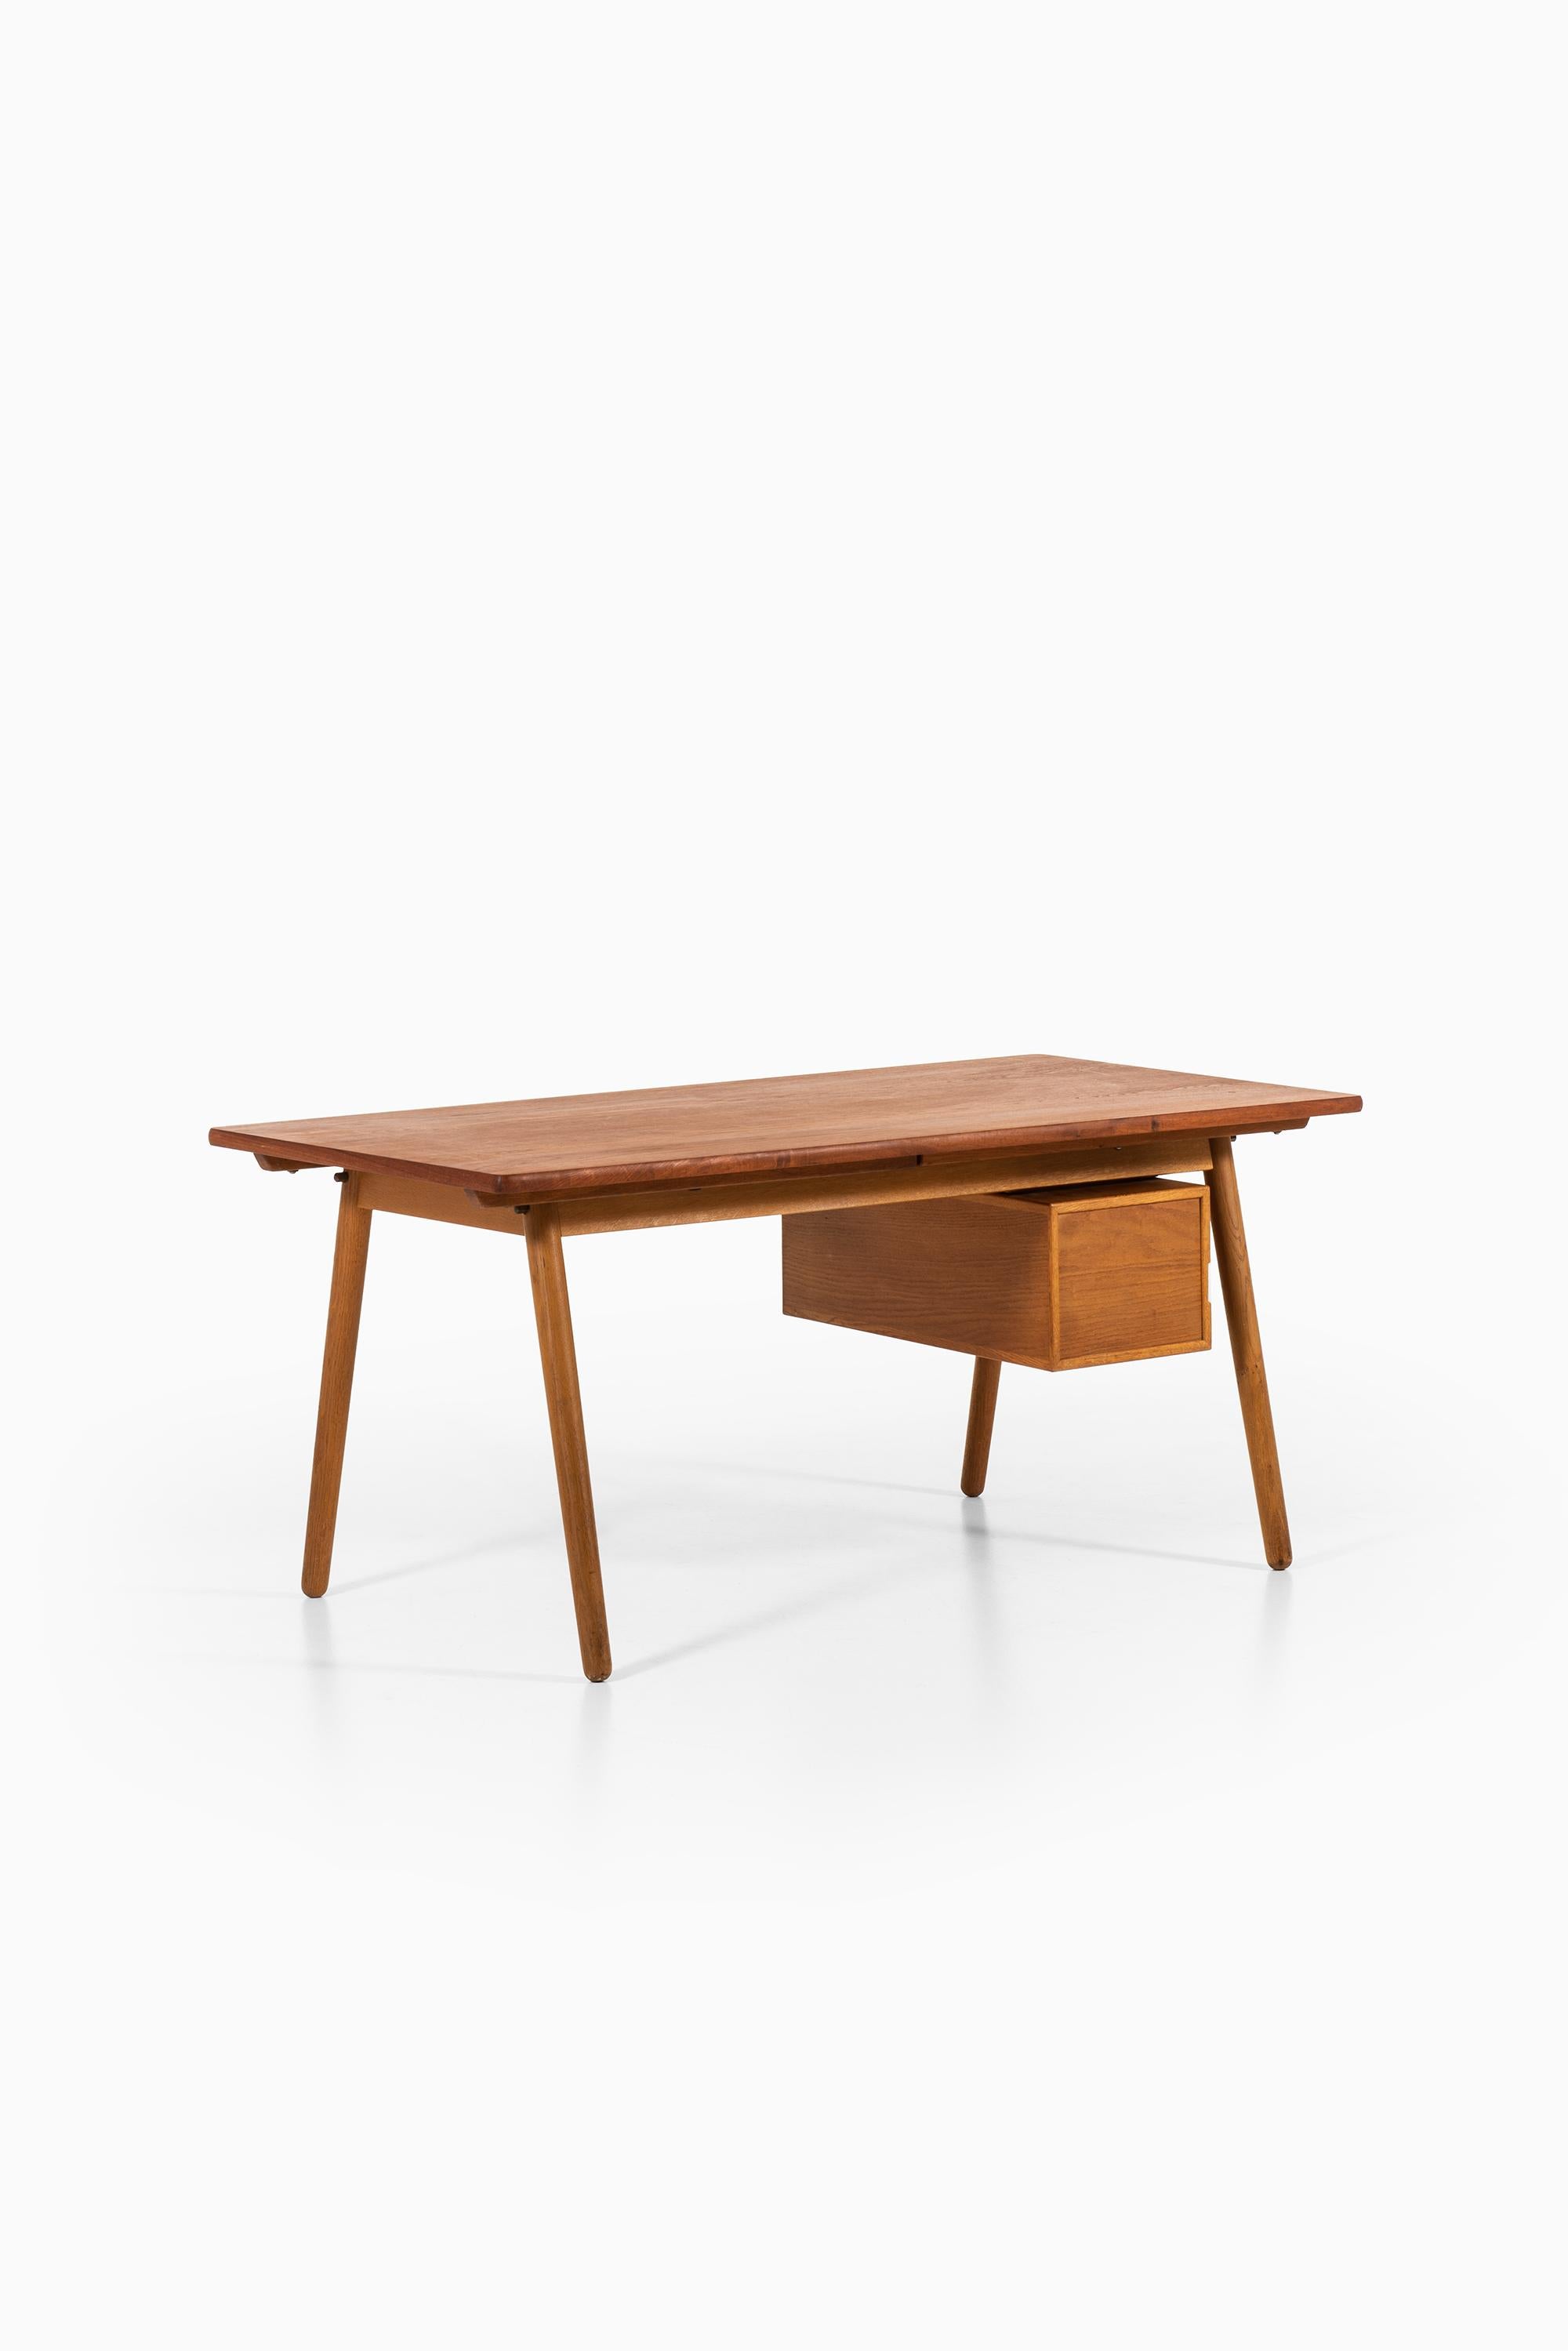 Brass Poul Volther Desk Produced by FDB Møbler in Denmark For Sale